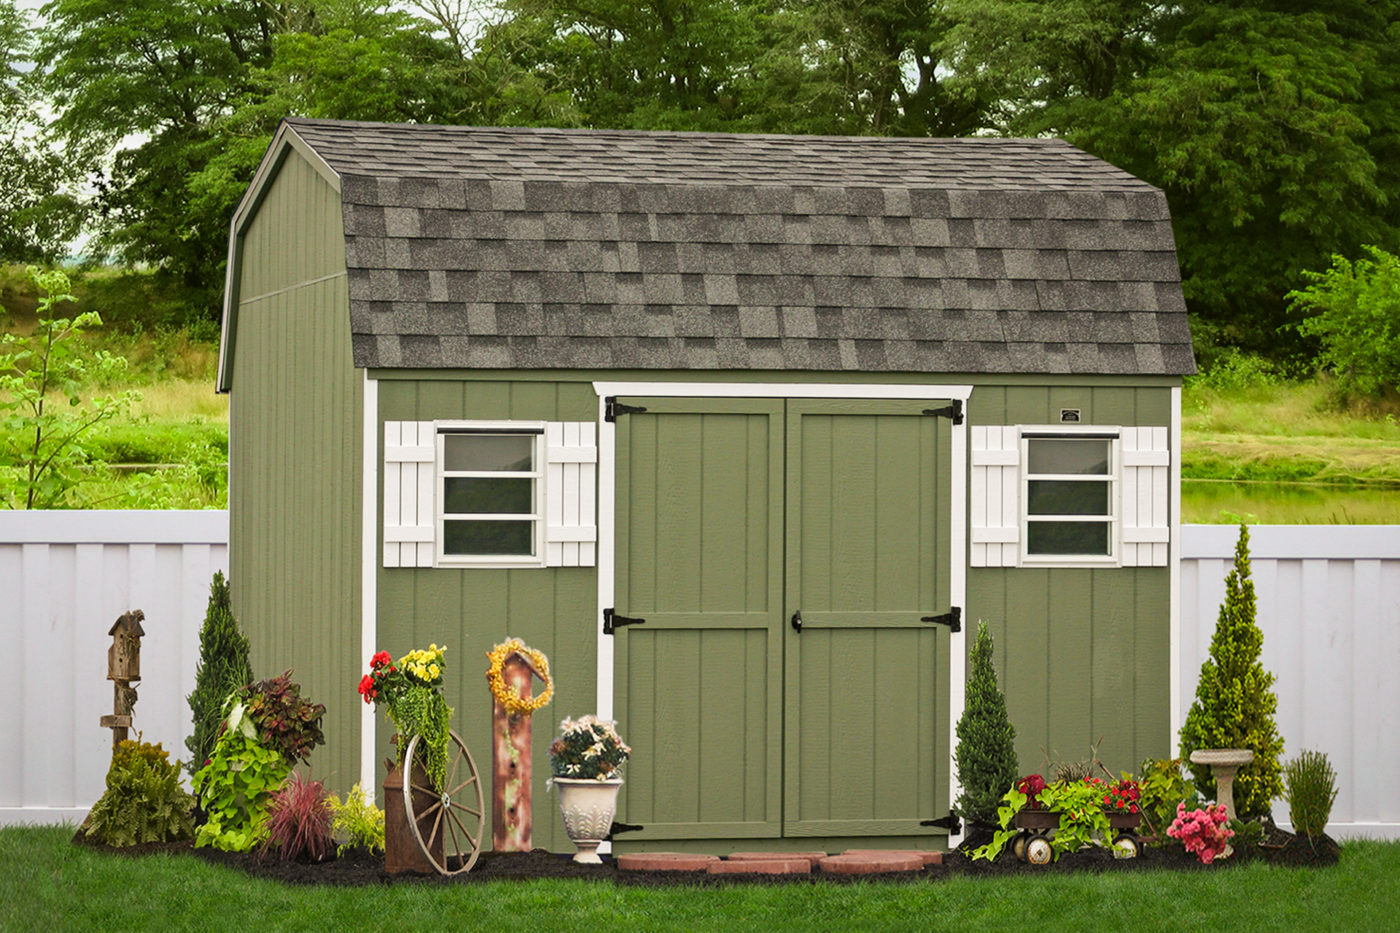 A maxibarn shed from Sheds Unlimited